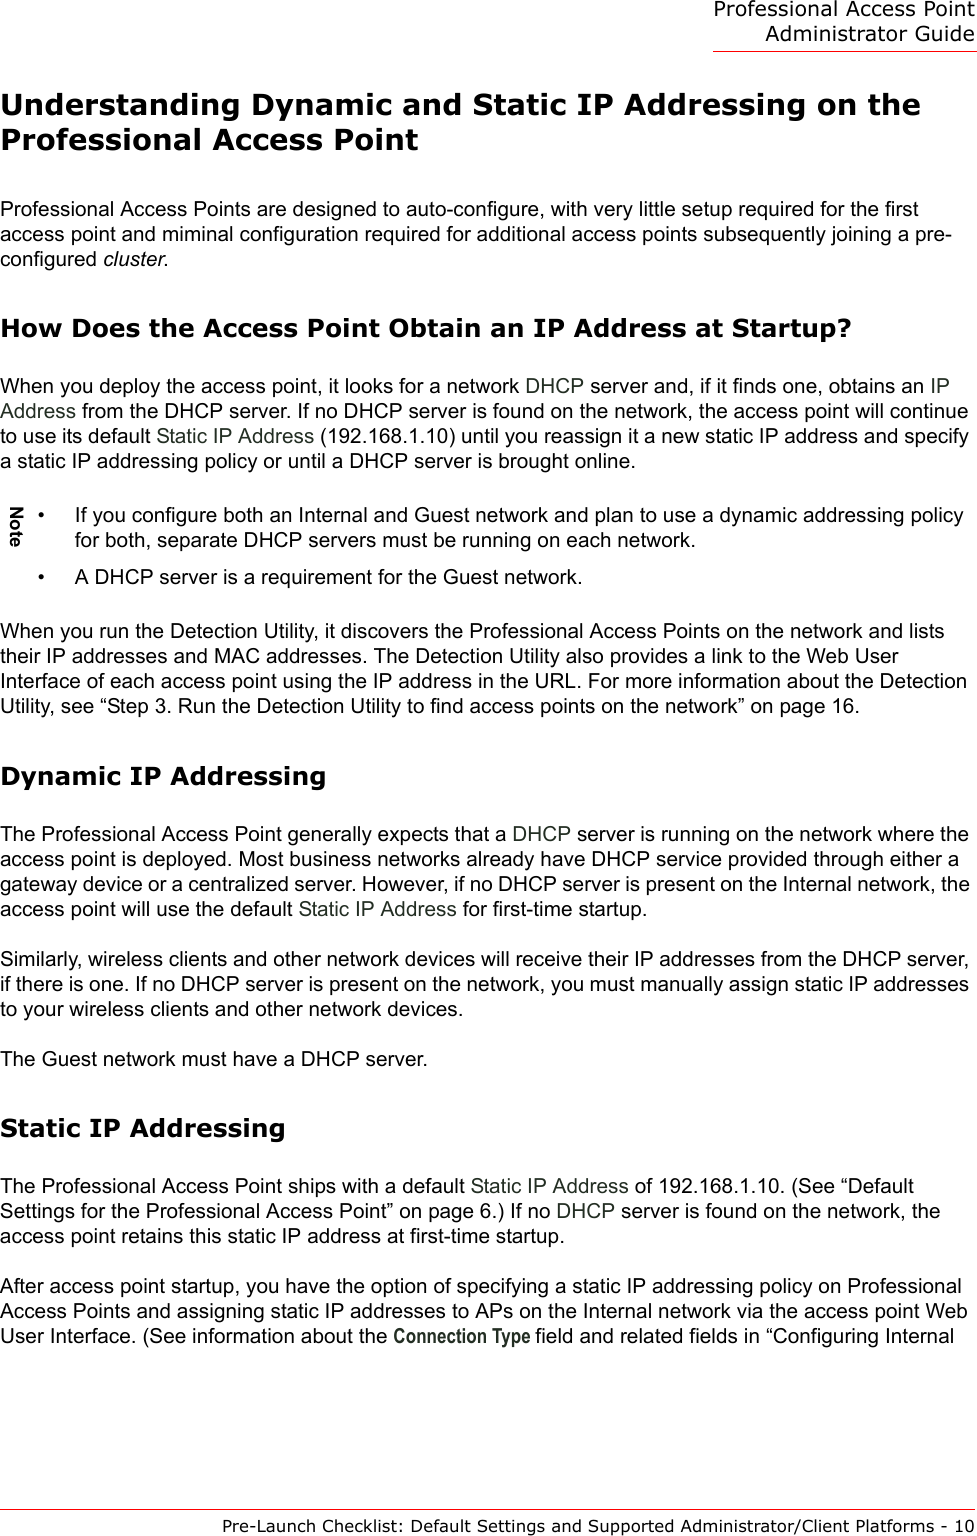 Professional Access Point Administrator GuidePre-Launch Checklist: Default Settings and Supported Administrator/Client Platforms - 10Understanding Dynamic and Static IP Addressing on the Professional Access PointProfessional Access Points are designed to auto-configure, with very little setup required for the first access point and miminal configuration required for additional access points subsequently joining a pre-configured cluster.How Does the Access Point Obtain an IP Address at Startup?When you deploy the access point, it looks for a network DHCP server and, if it finds one, obtains an IP Address from the DHCP server. If no DHCP server is found on the network, the access point will continue to use its default Static IP Address (192.168.1.10) until you reassign it a new static IP address and specify a static IP addressing policy or until a DHCP server is brought online.When you run the Detection Utility, it discovers the Professional Access Points on the network and lists their IP addresses and MAC addresses. The Detection Utility also provides a link to the Web User Interface of each access point using the IP address in the URL. For more information about the Detection Utility, see “Step 3. Run the Detection Utility to find access points on the network” on page 16.Dynamic IP AddressingThe Professional Access Point generally expects that a DHCP server is running on the network where the access point is deployed. Most business networks already have DHCP service provided through either a gateway device or a centralized server. However, if no DHCP server is present on the Internal network, the access point will use the default Static IP Address for first-time startup.Similarly, wireless clients and other network devices will receive their IP addresses from the DHCP server, if there is one. If no DHCP server is present on the network, you must manually assign static IP addresses to your wireless clients and other network devices.The Guest network must have a DHCP server.Static IP AddressingThe Professional Access Point ships with a default Static IP Address of 192.168.1.10. (See “Default Settings for the Professional Access Point” on page 6.) If no DHCP server is found on the network, the access point retains this static IP address at first-time startup.After access point startup, you have the option of specifying a static IP addressing policy on Professional Access Points and assigning static IP addresses to APs on the Internal network via the access point Web User Interface. (See information about the Connection Type field and related fields in “Configuring Internal Note• If you configure both an Internal and Guest network and plan to use a dynamic addressing policy for both, separate DHCP servers must be running on each network.• A DHCP server is a requirement for the Guest network.